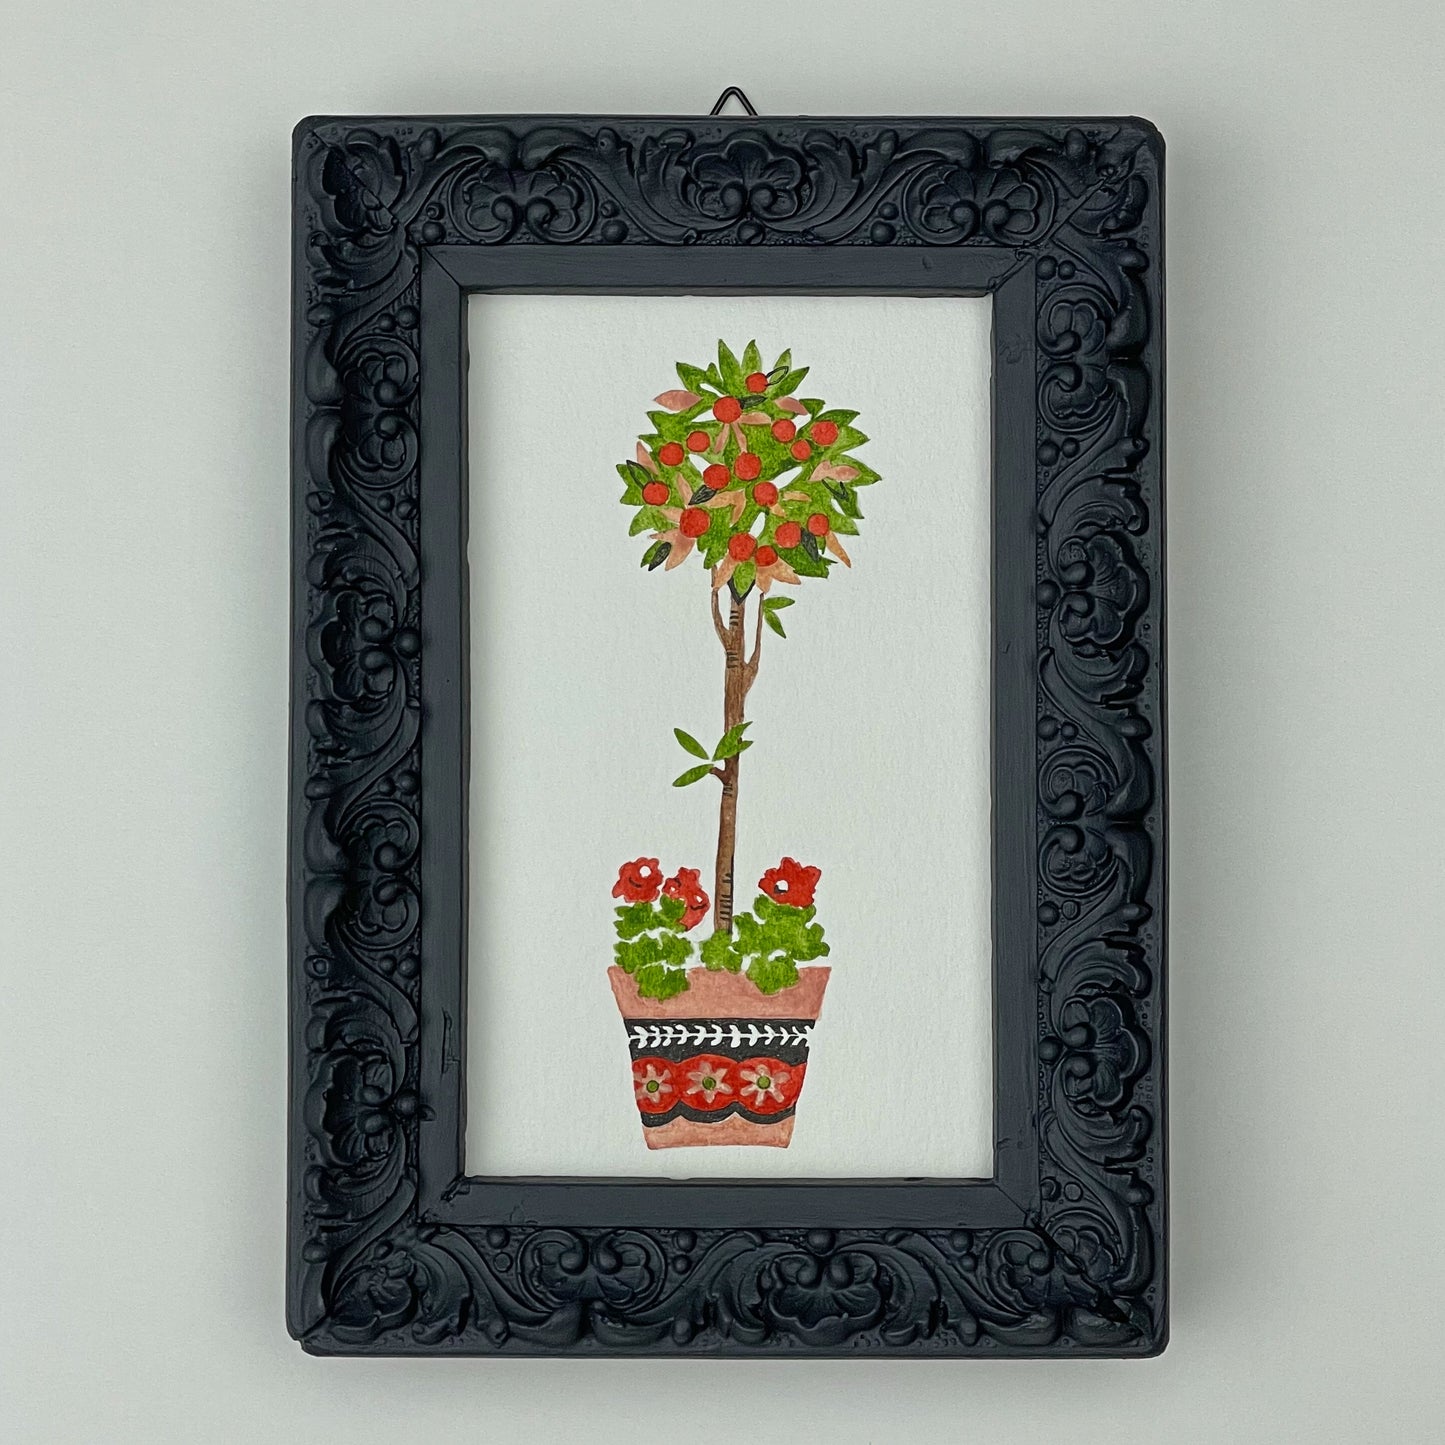 "POTTED FRUIT TREE" 6/8 INTO THE KITCHEN SERIES